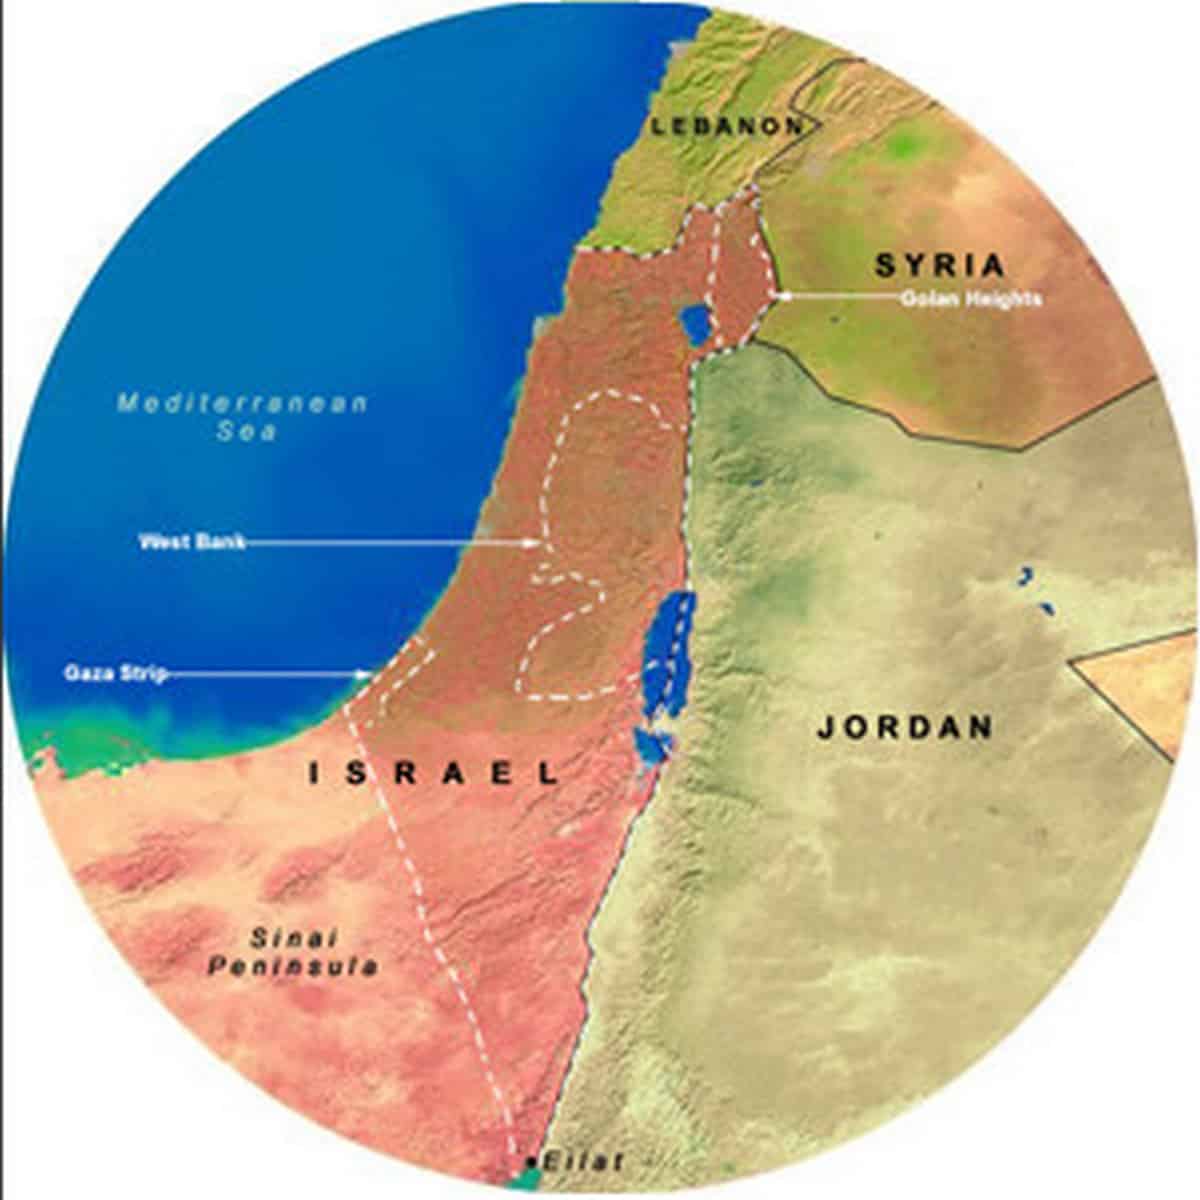 Palestine: What if the Six-Day War never took place?